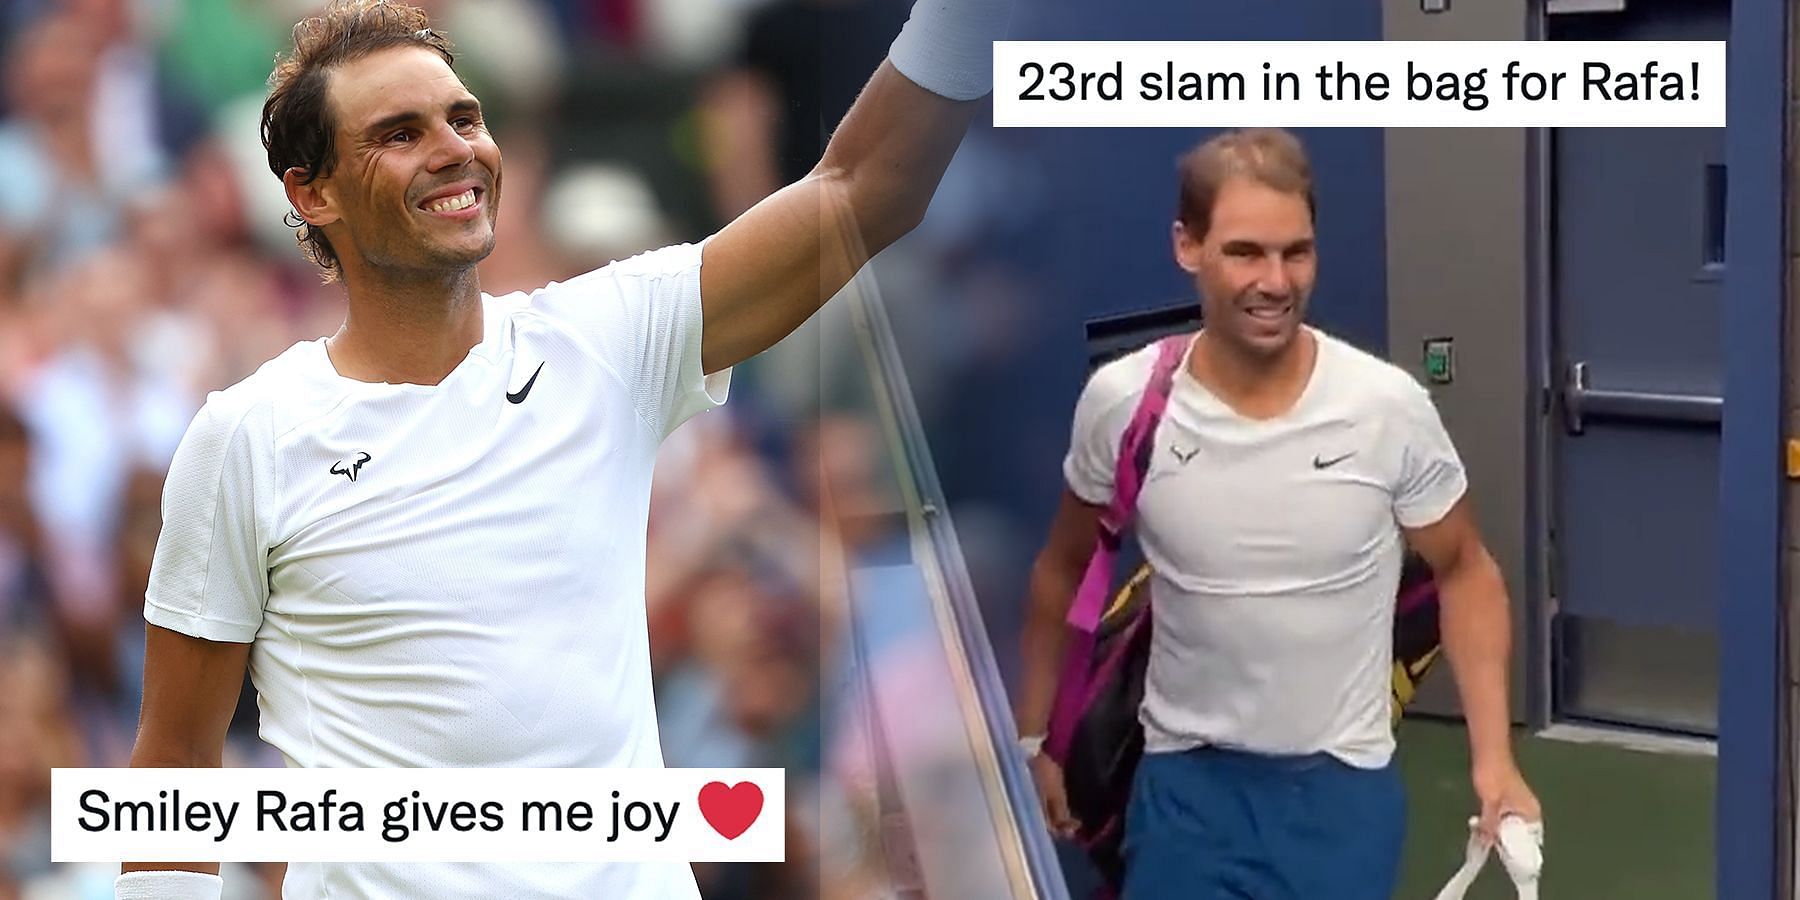 Rafael Nadal is aiming for his 23rd Grand Slam title at the US Open